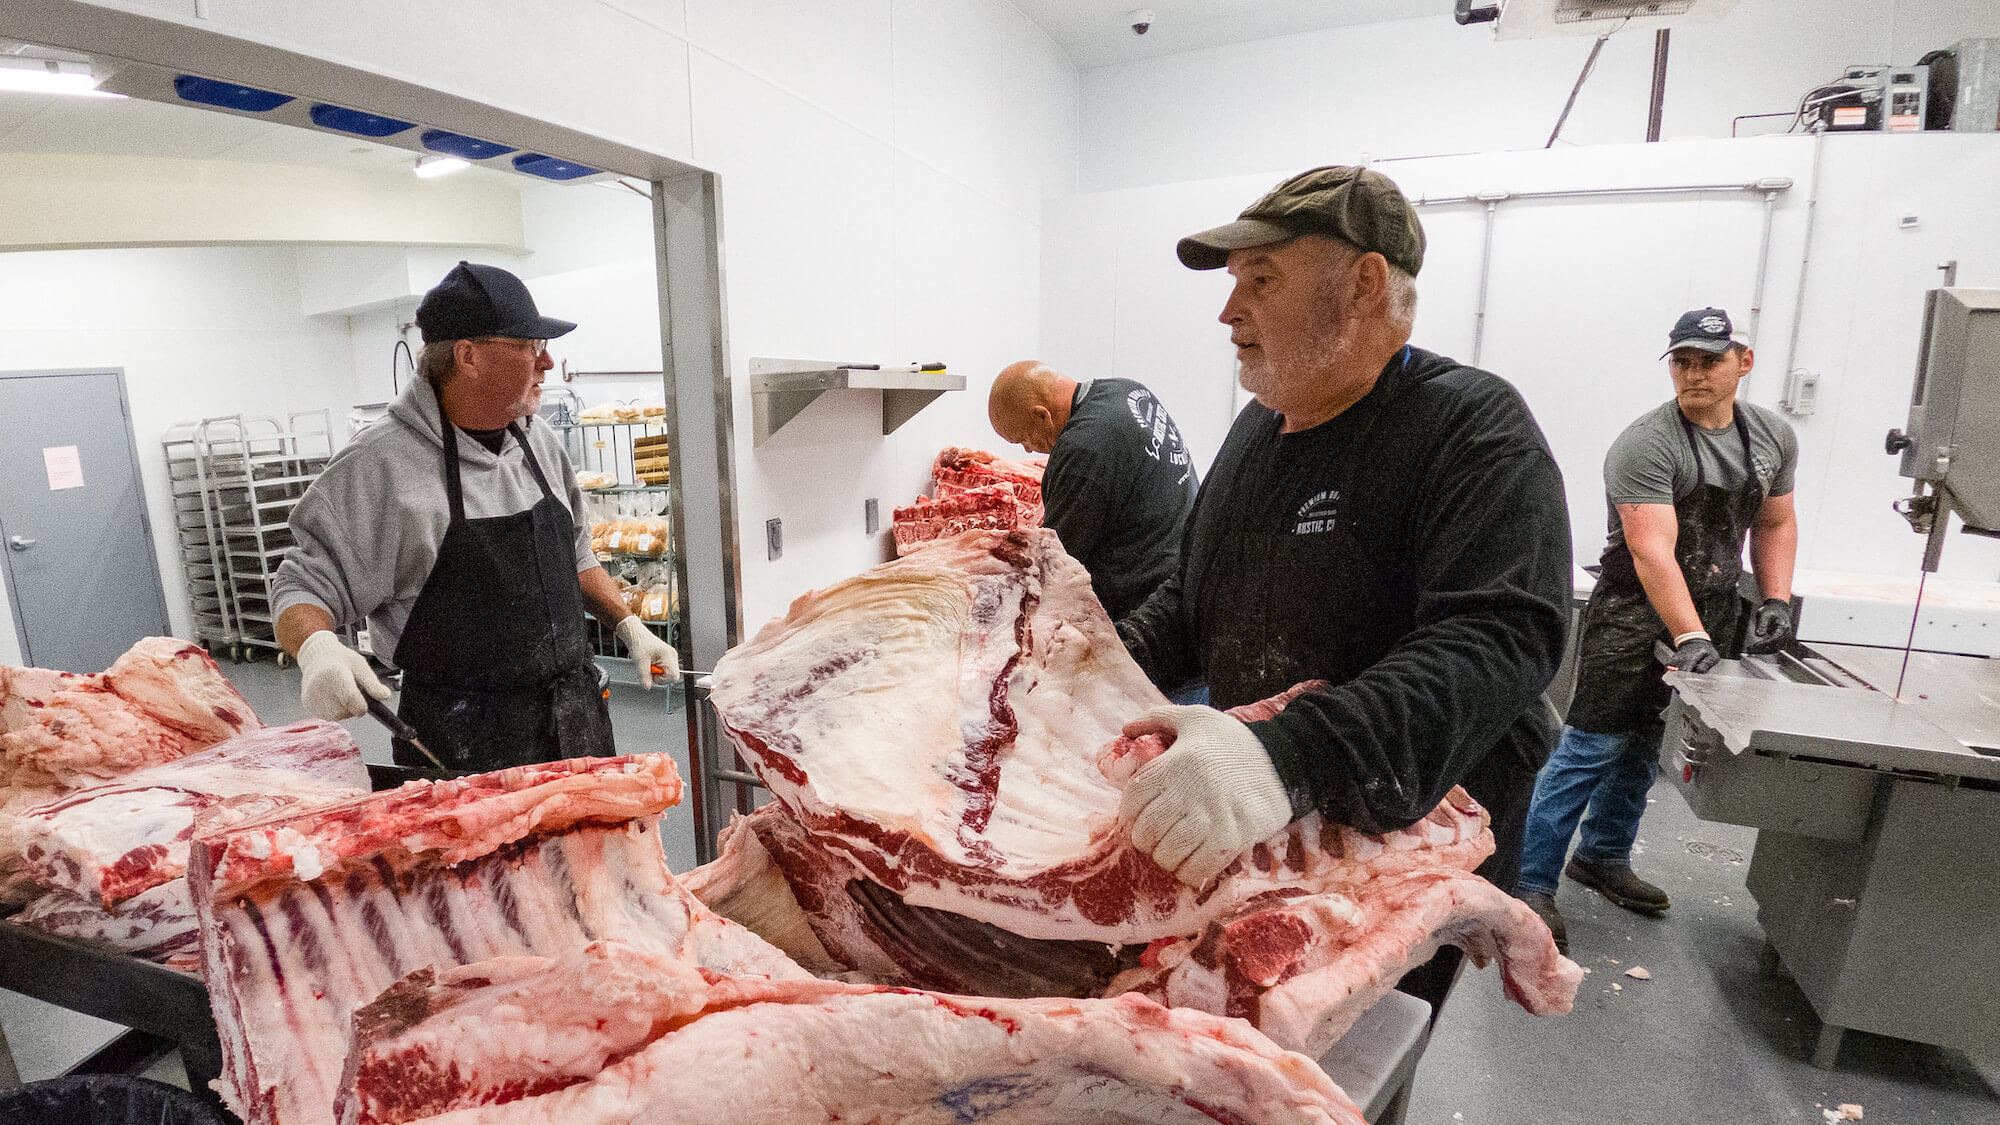 From left, meat cutters Charlie Stedman, Brock Laber, Marty Smith and Zach Sales at Rustic Cuts butcher shop in Council Bluffs, IA, on July 9, 2021.